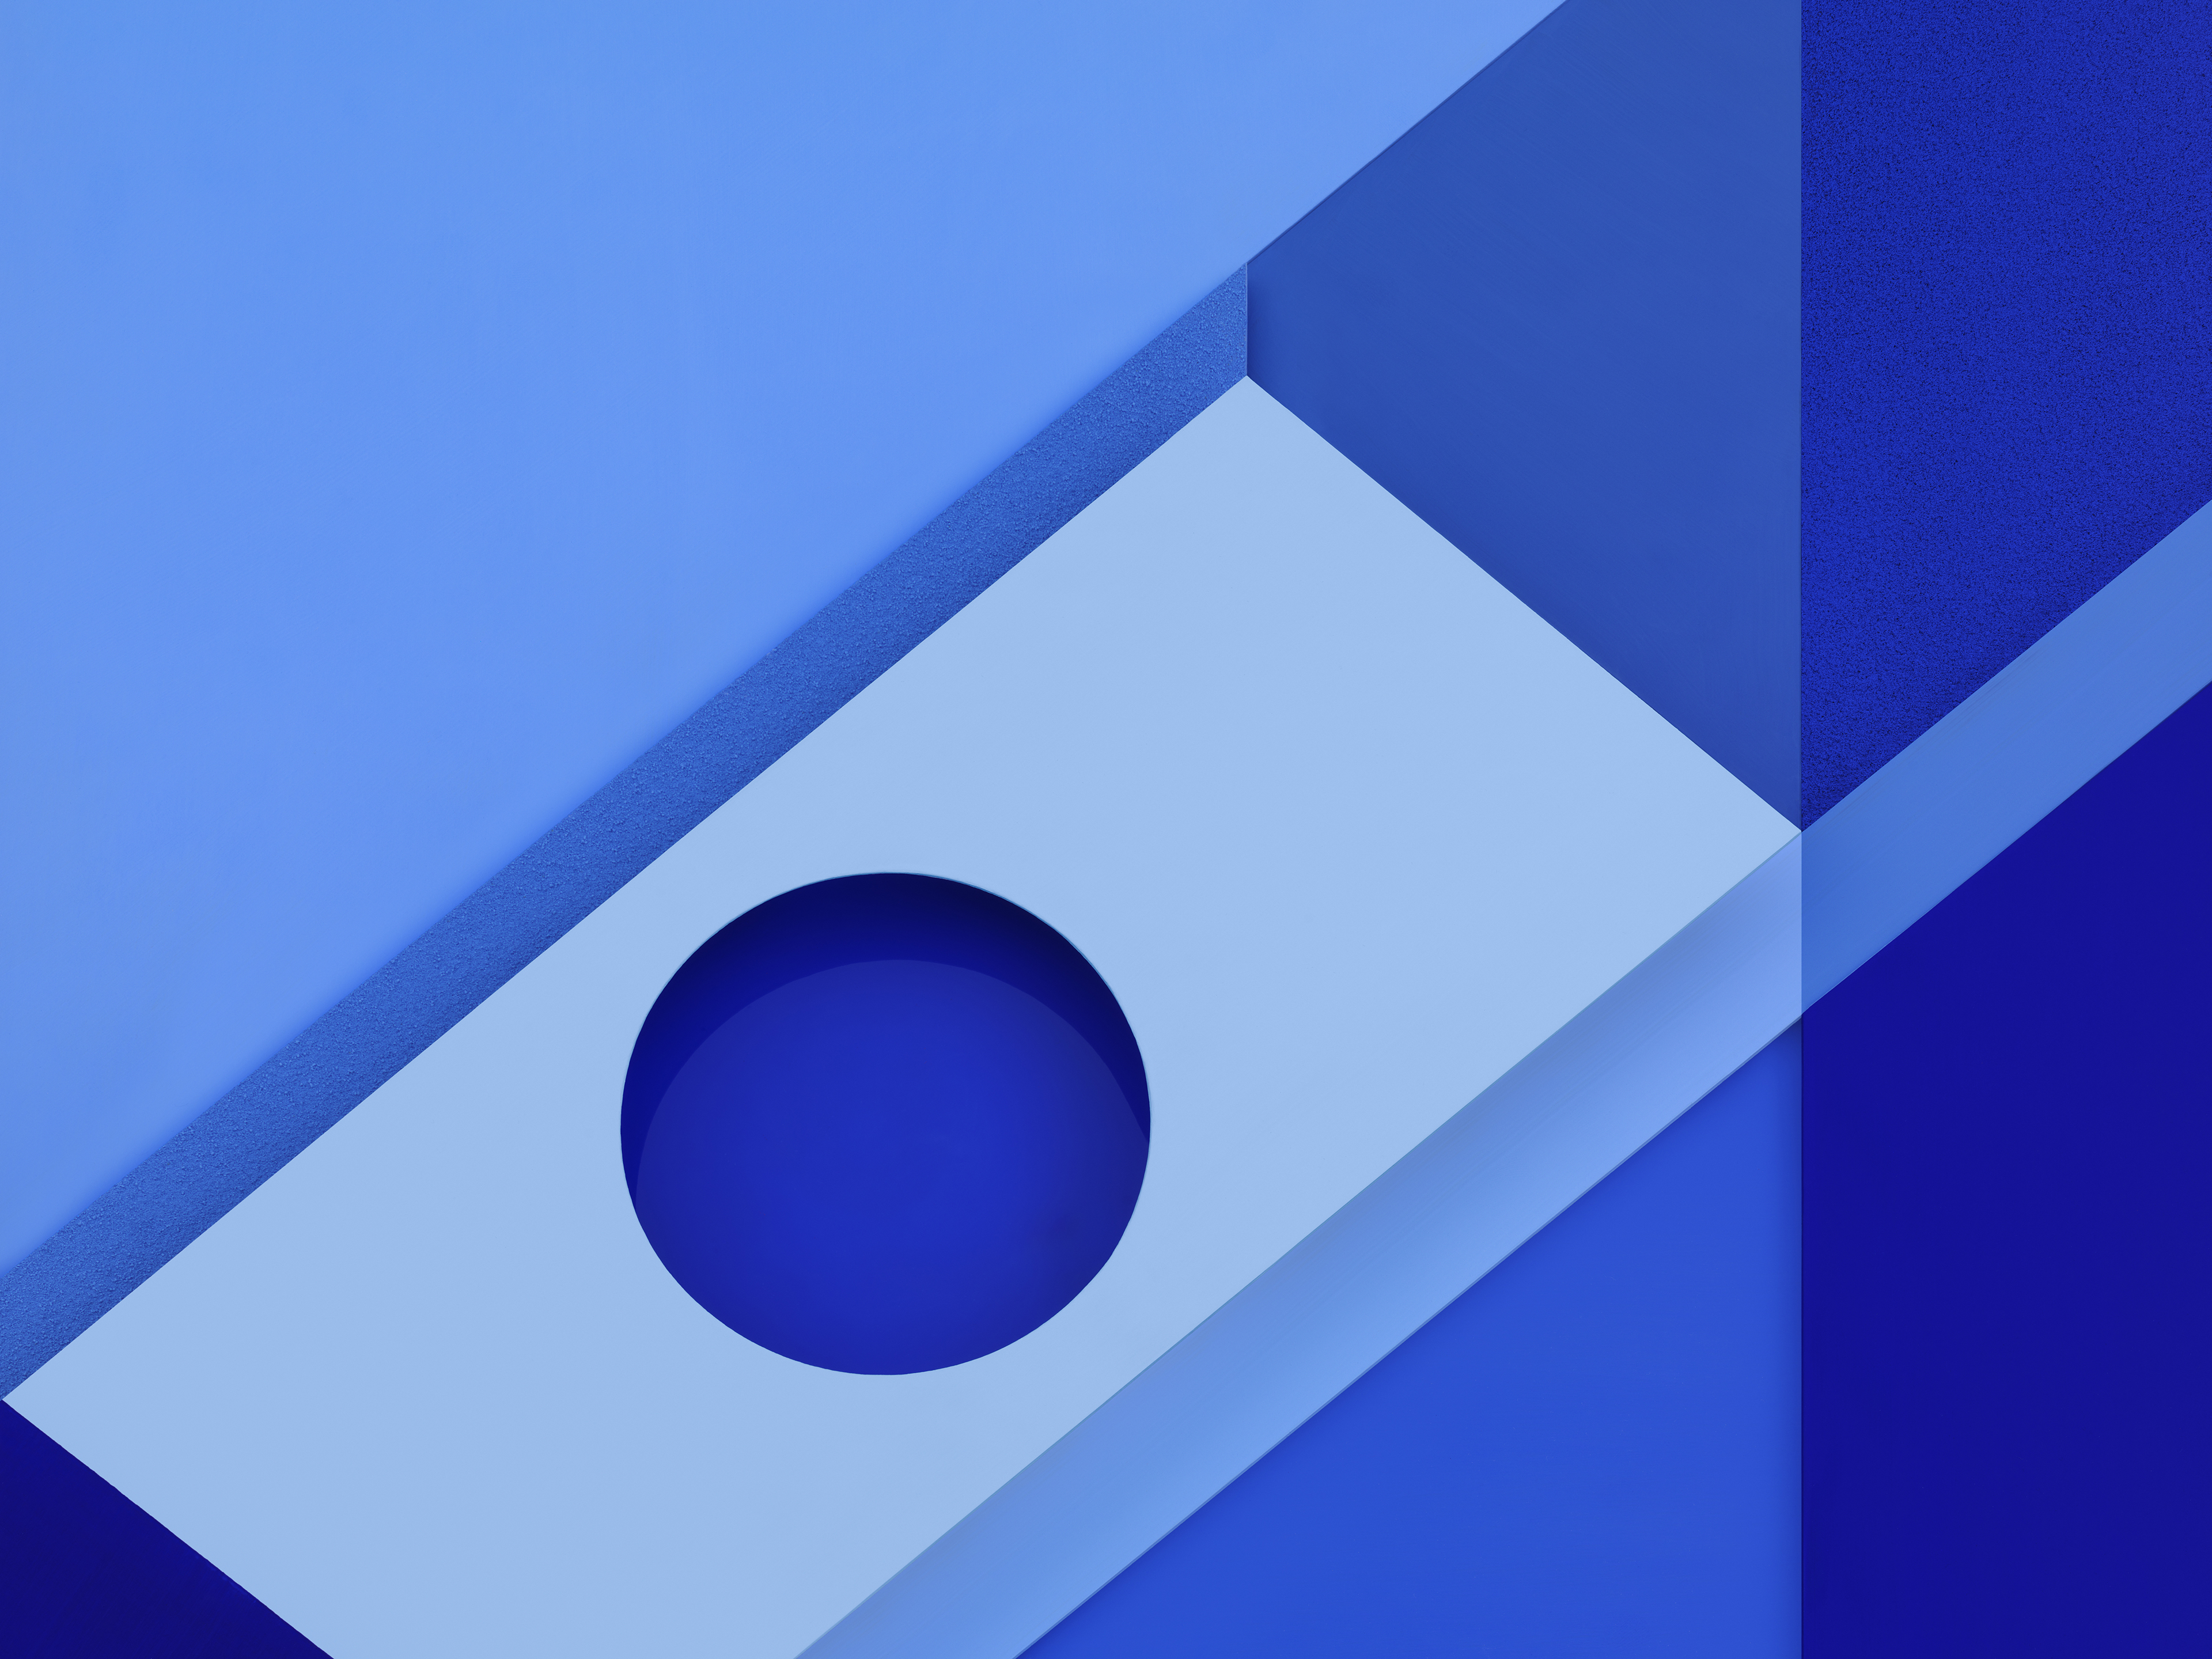 hd wallpapers for android marshmallow,cobalt blue,blue,electric blue,azure,purple